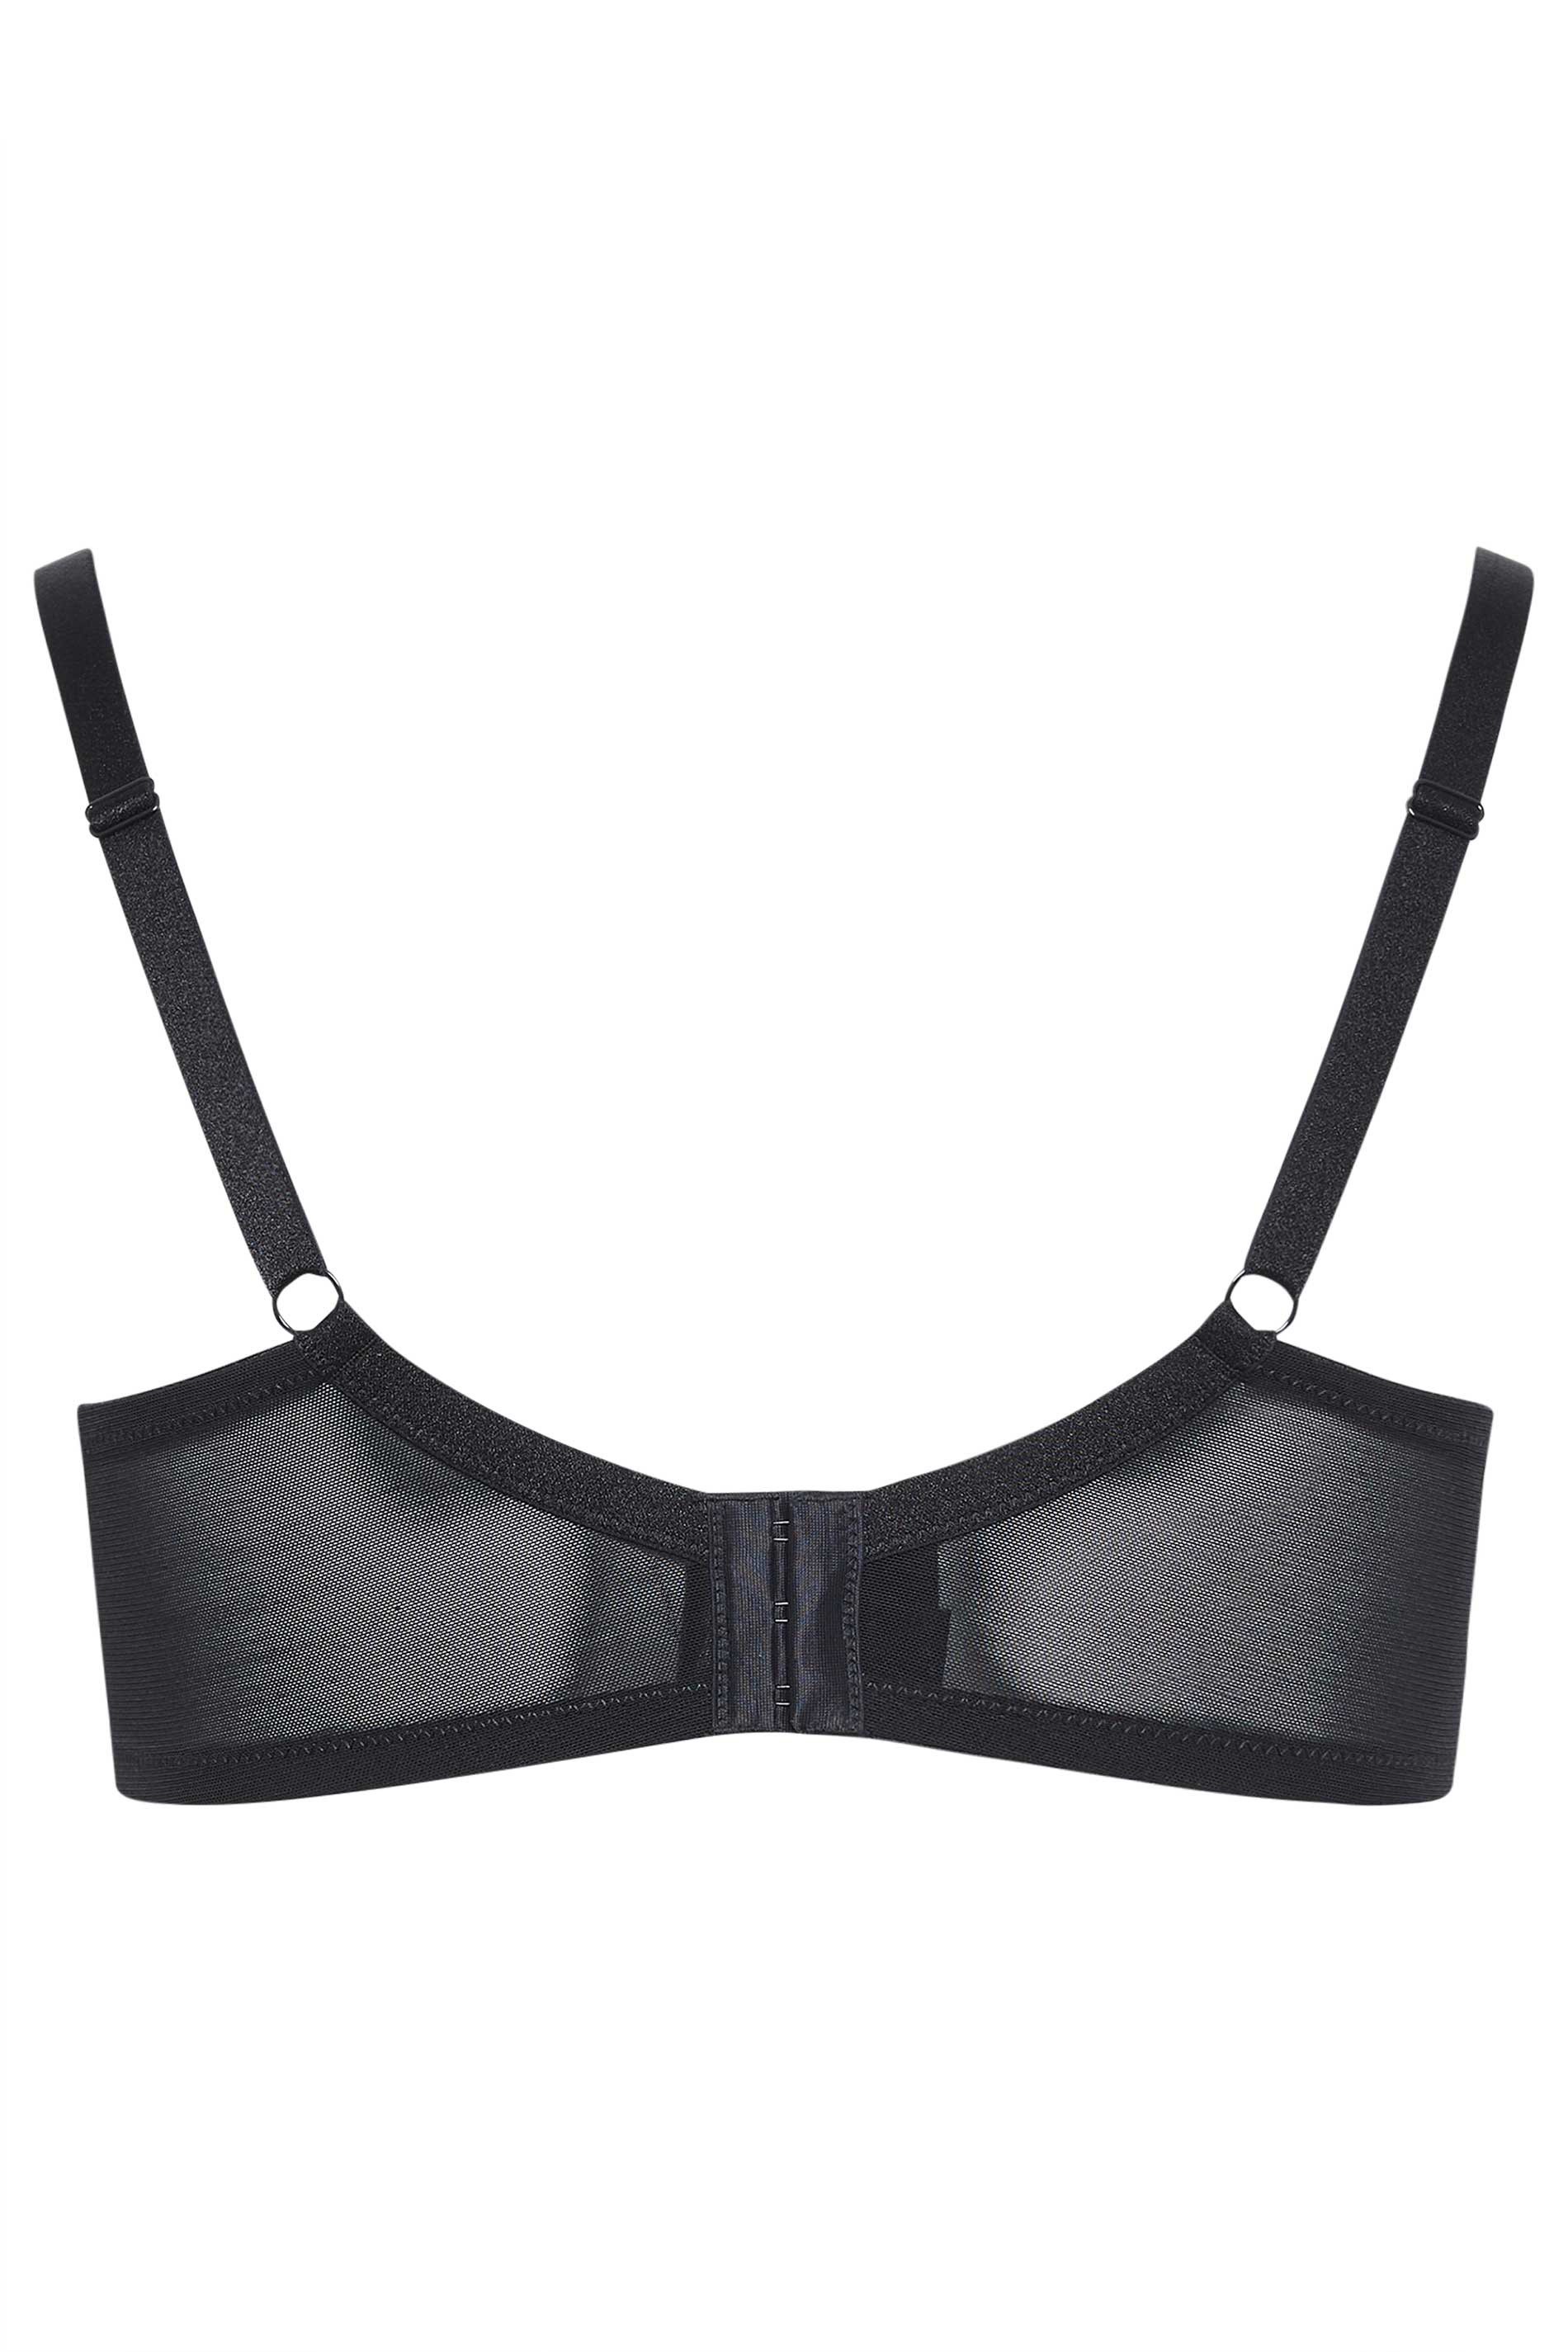 YOURS Curve Black Flocked Floral Mesh Padded Underwired T-Shirt Bra